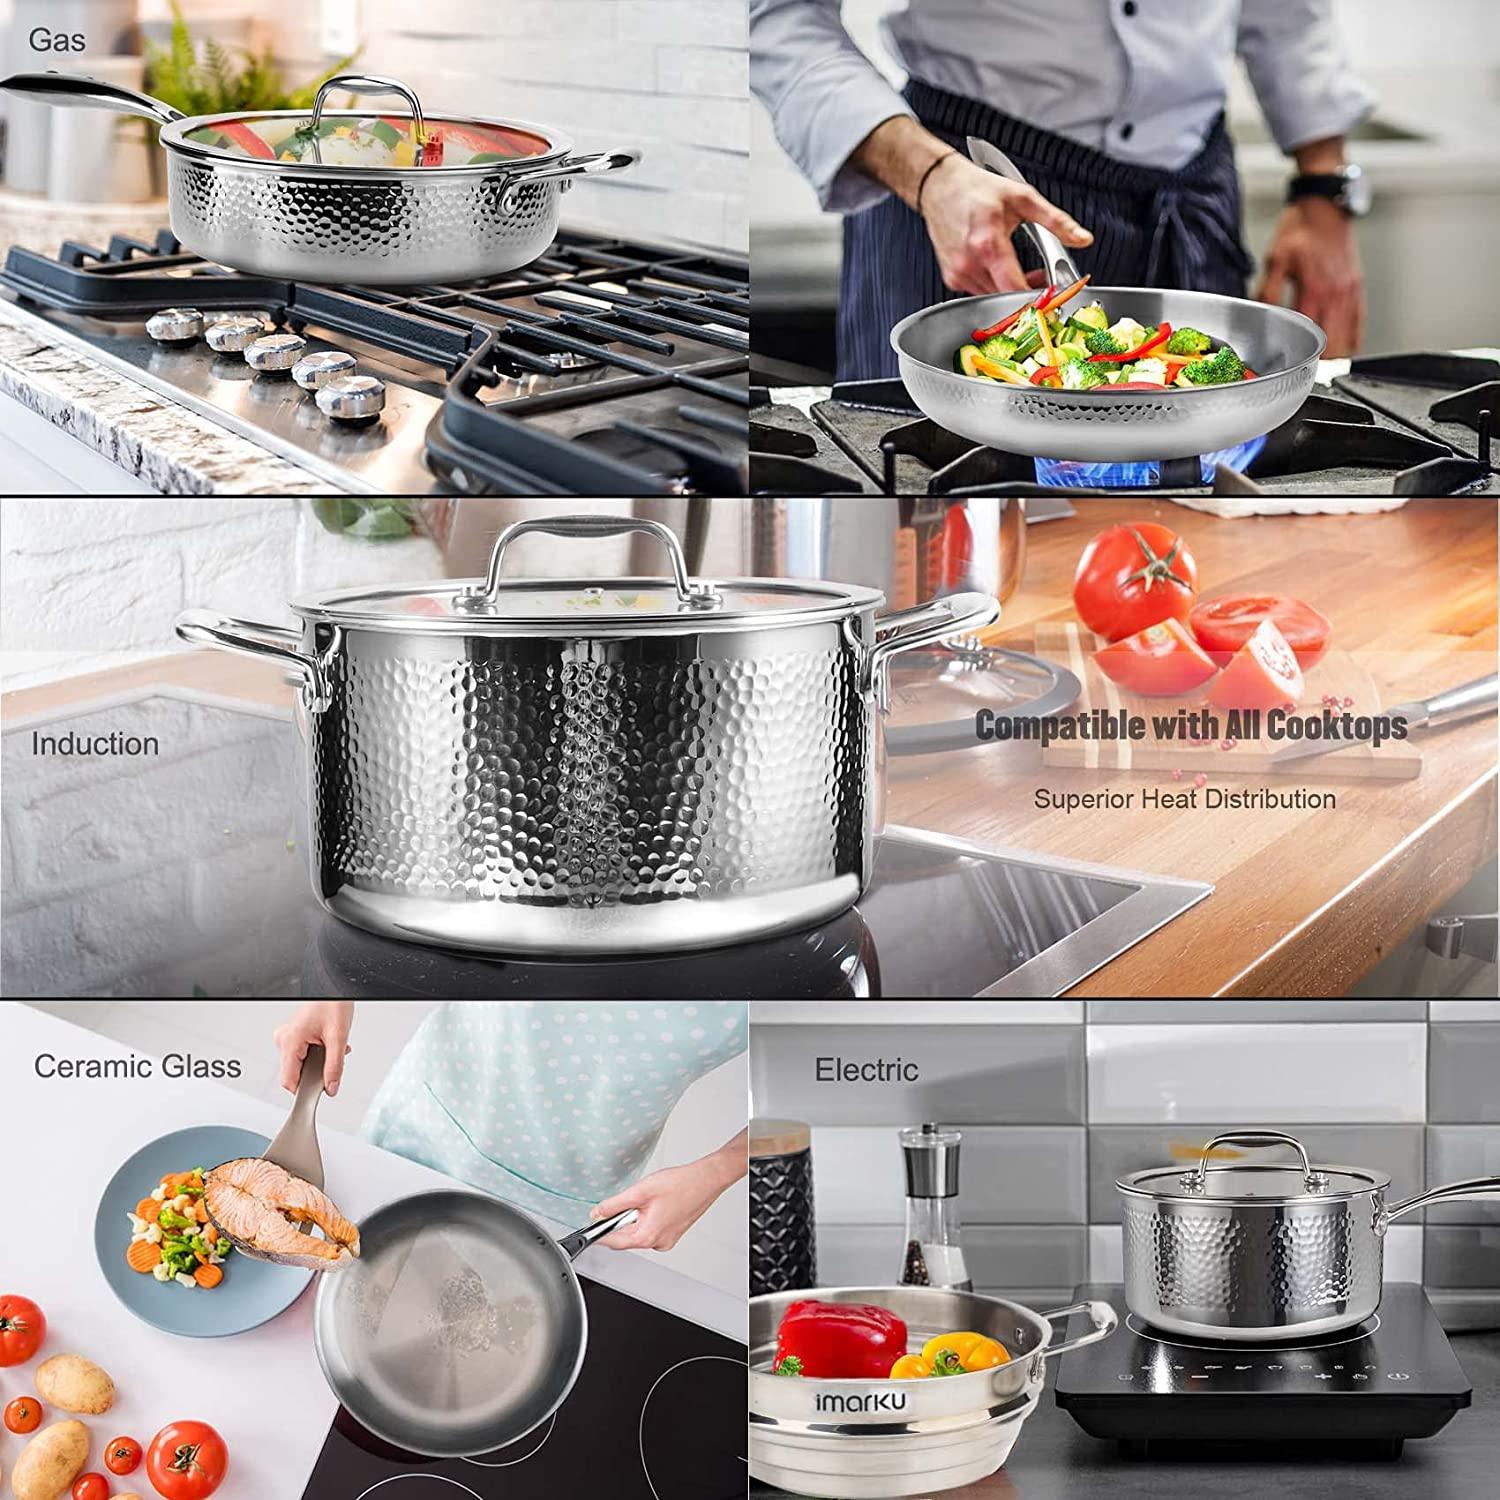 Best Pots and Pans for Gas Stove in 2023 - Reviews & Buyer Guide - IMARKU